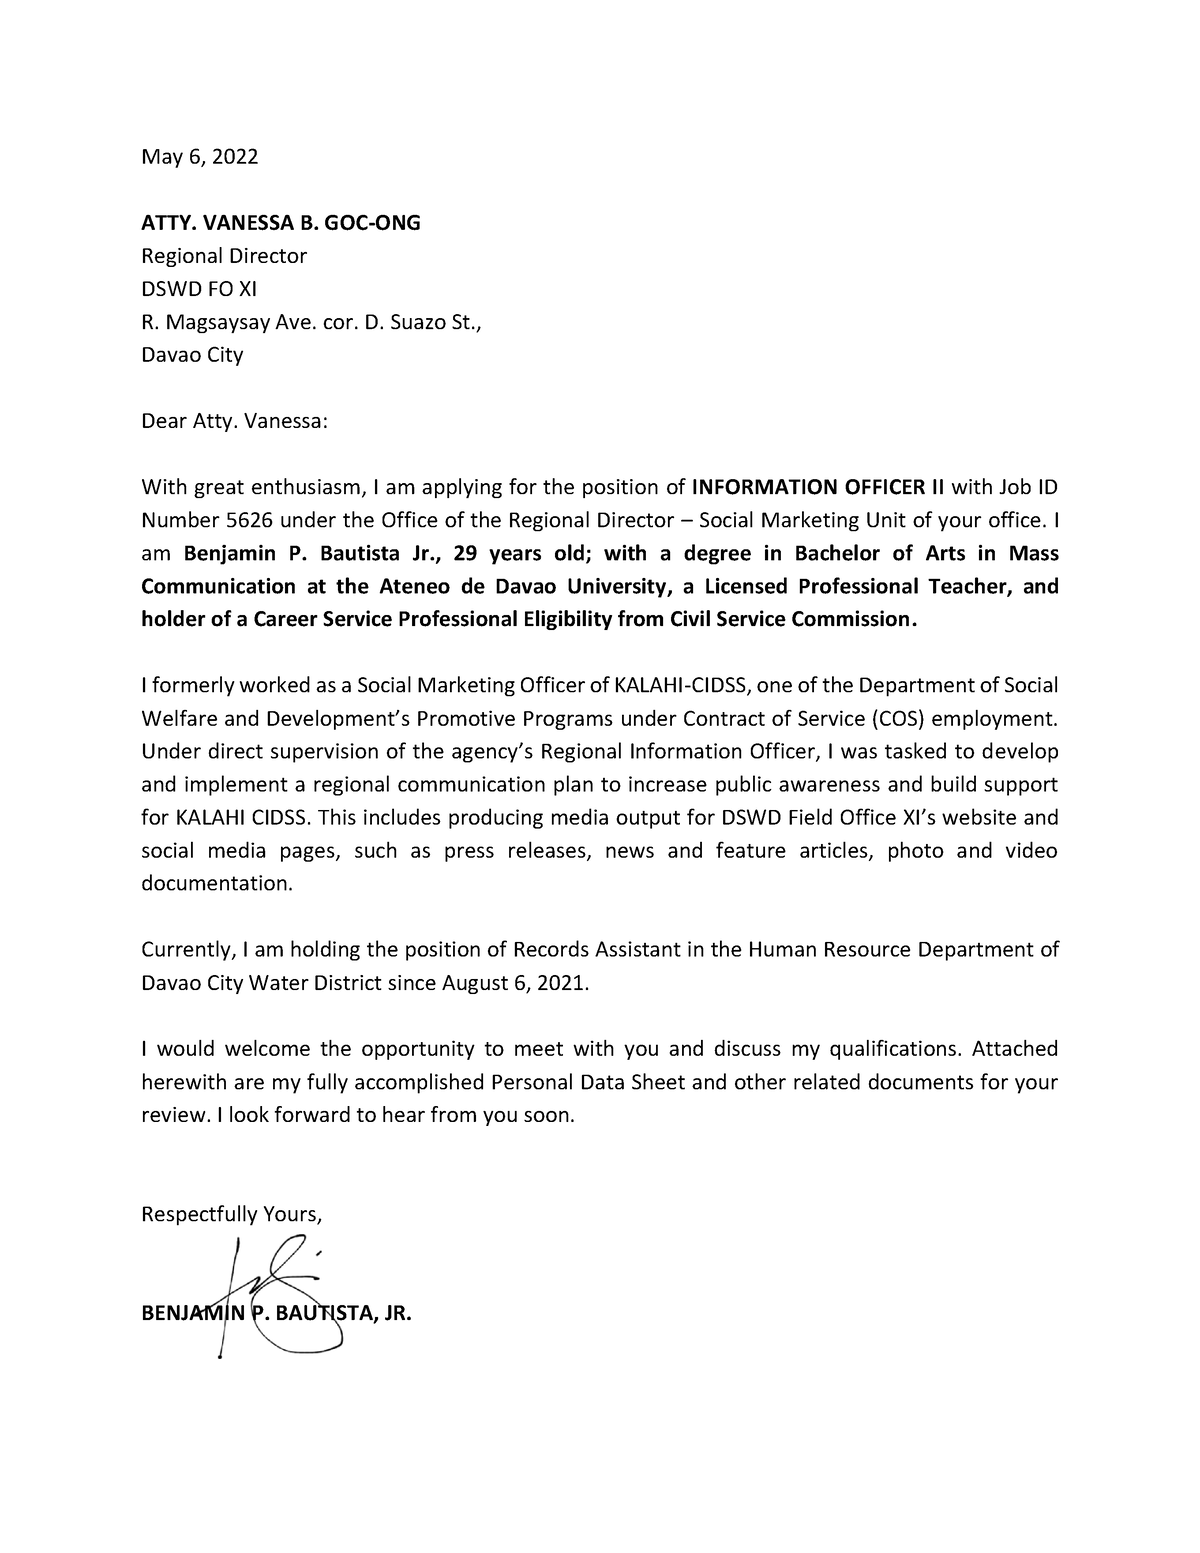 sample application letter for any position in dswd